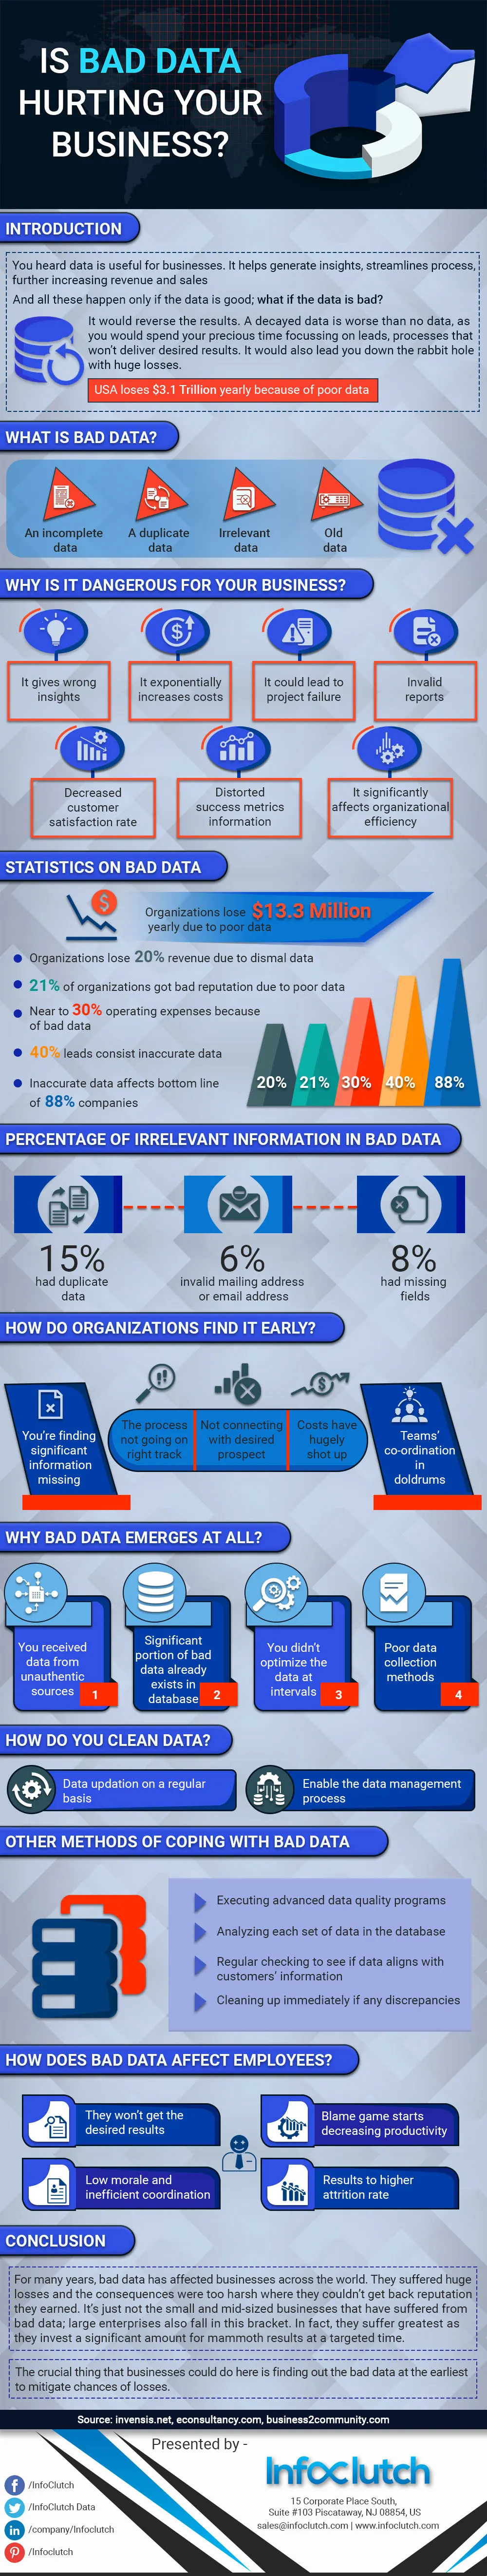 Is Bad Data Hurting Your Business?